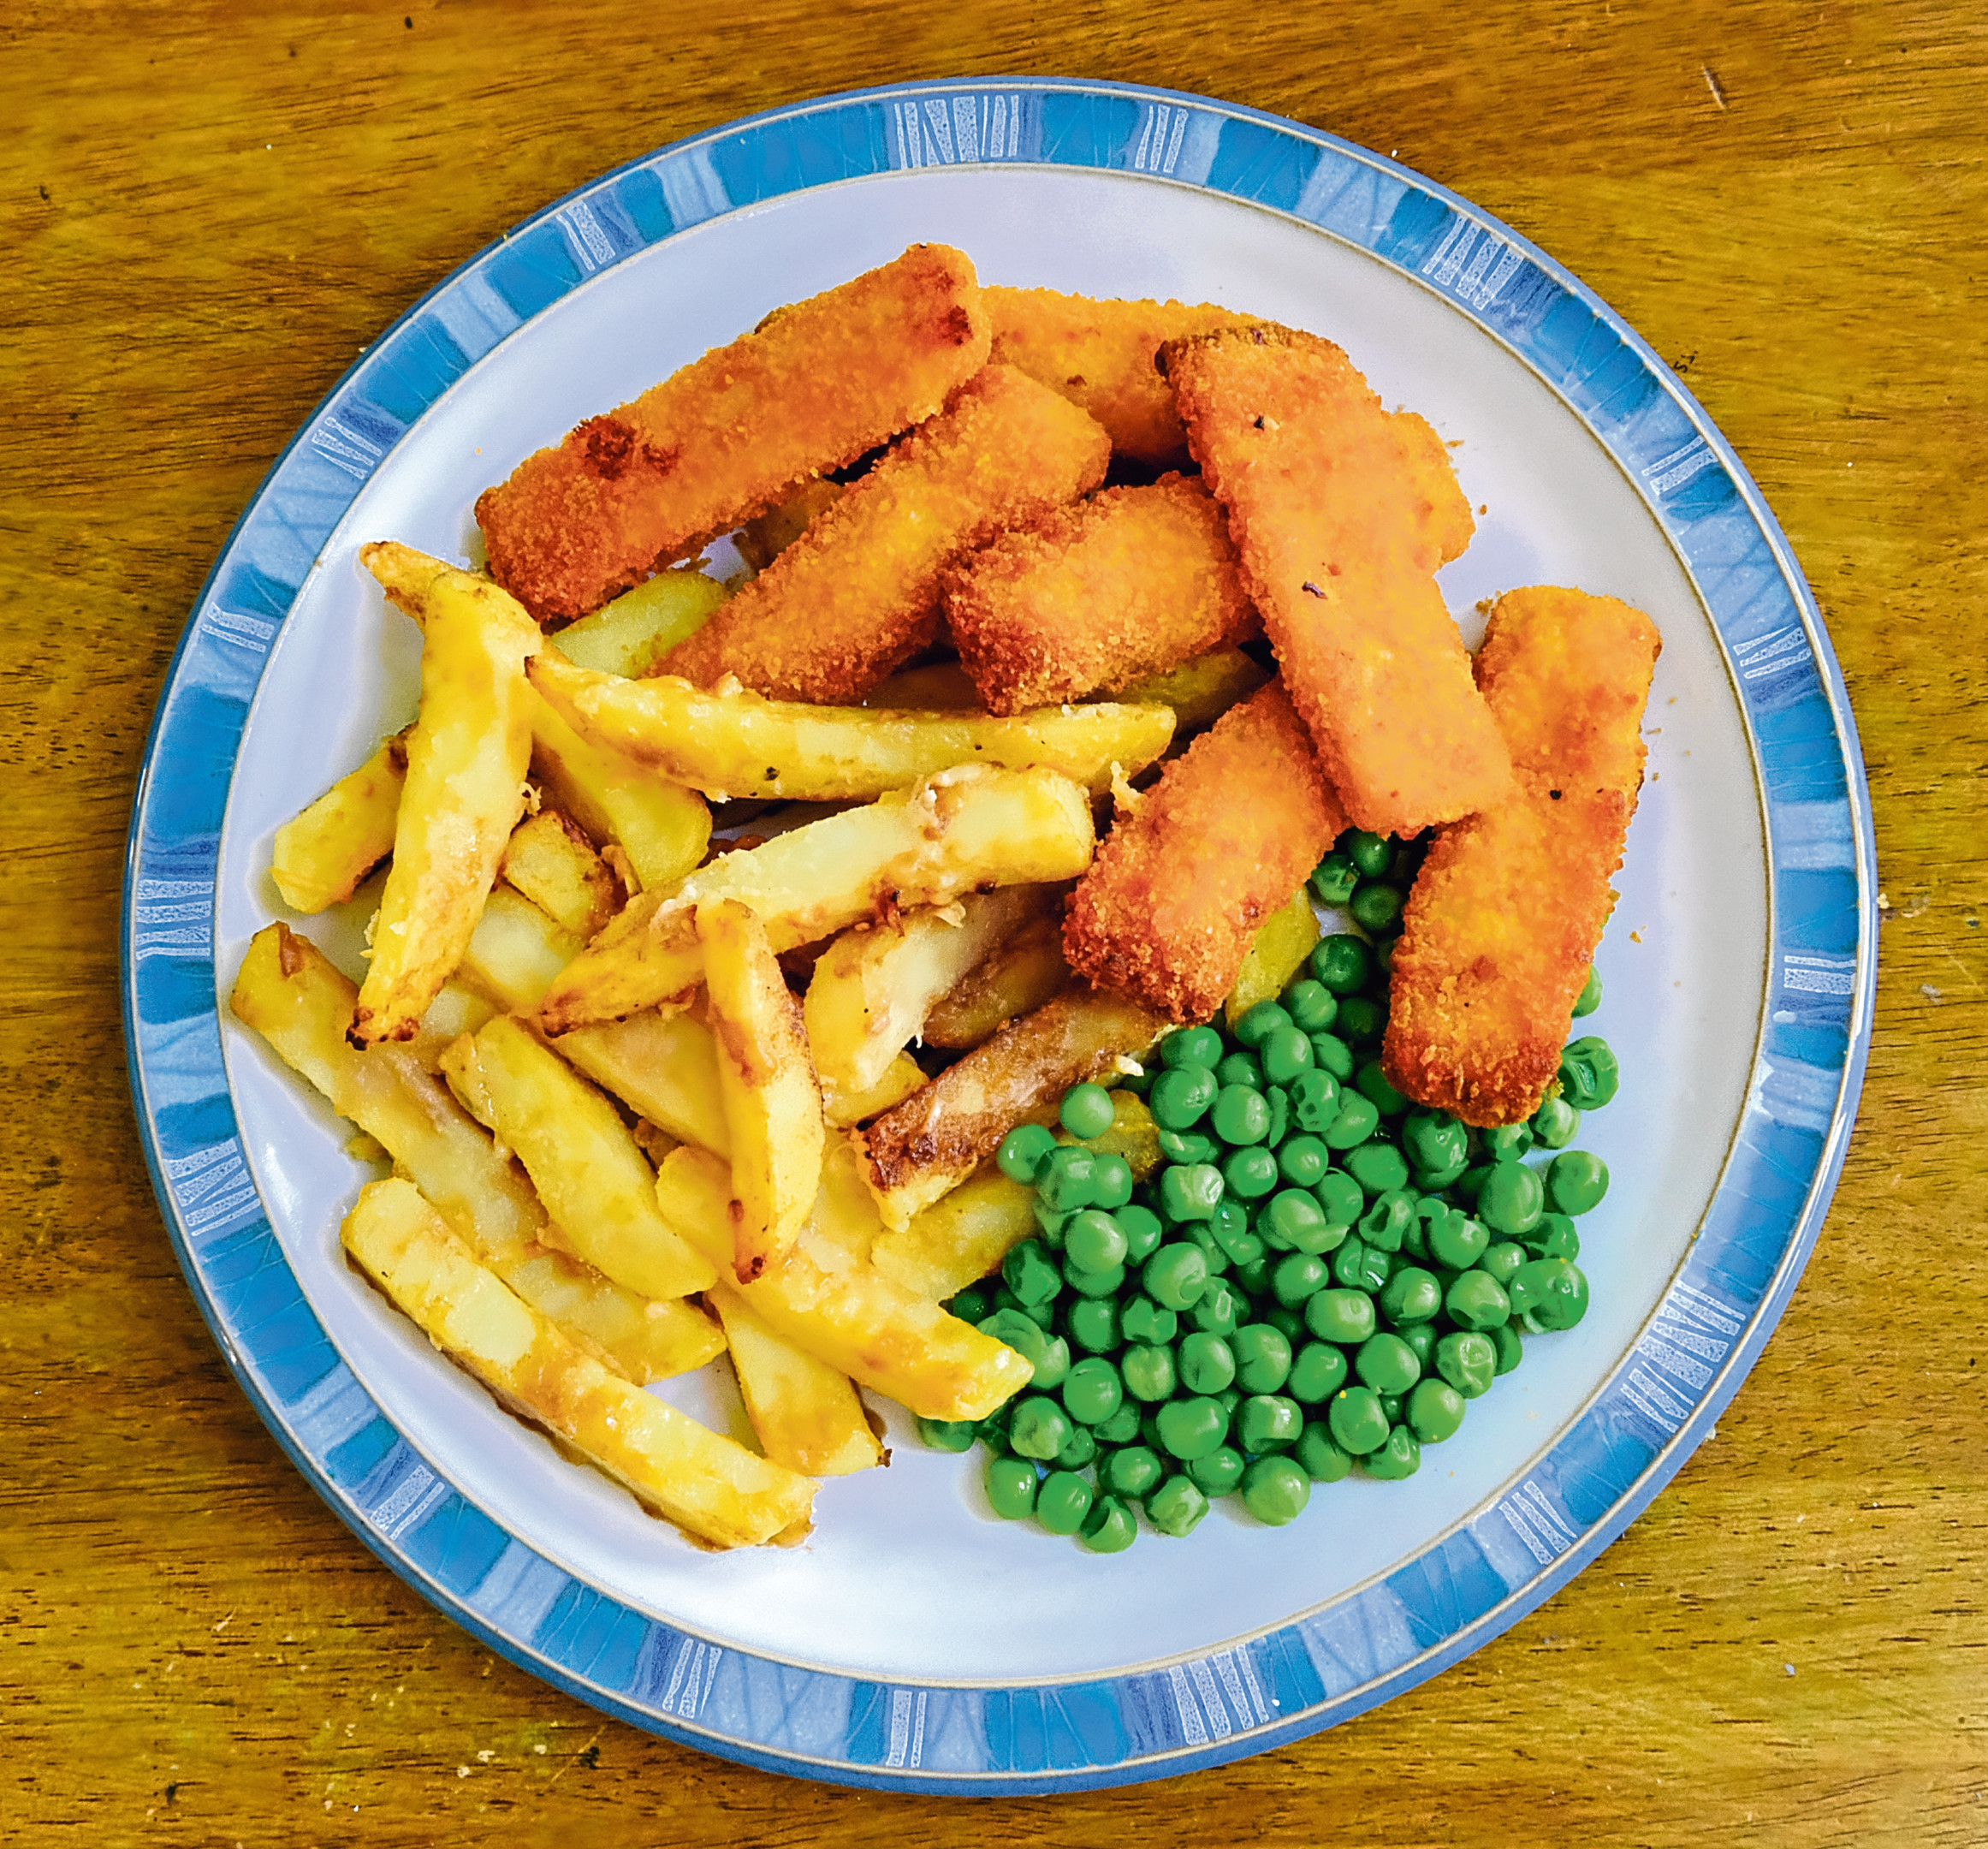 Traditional Fish fingers and Potato Chips, together with garden peas.